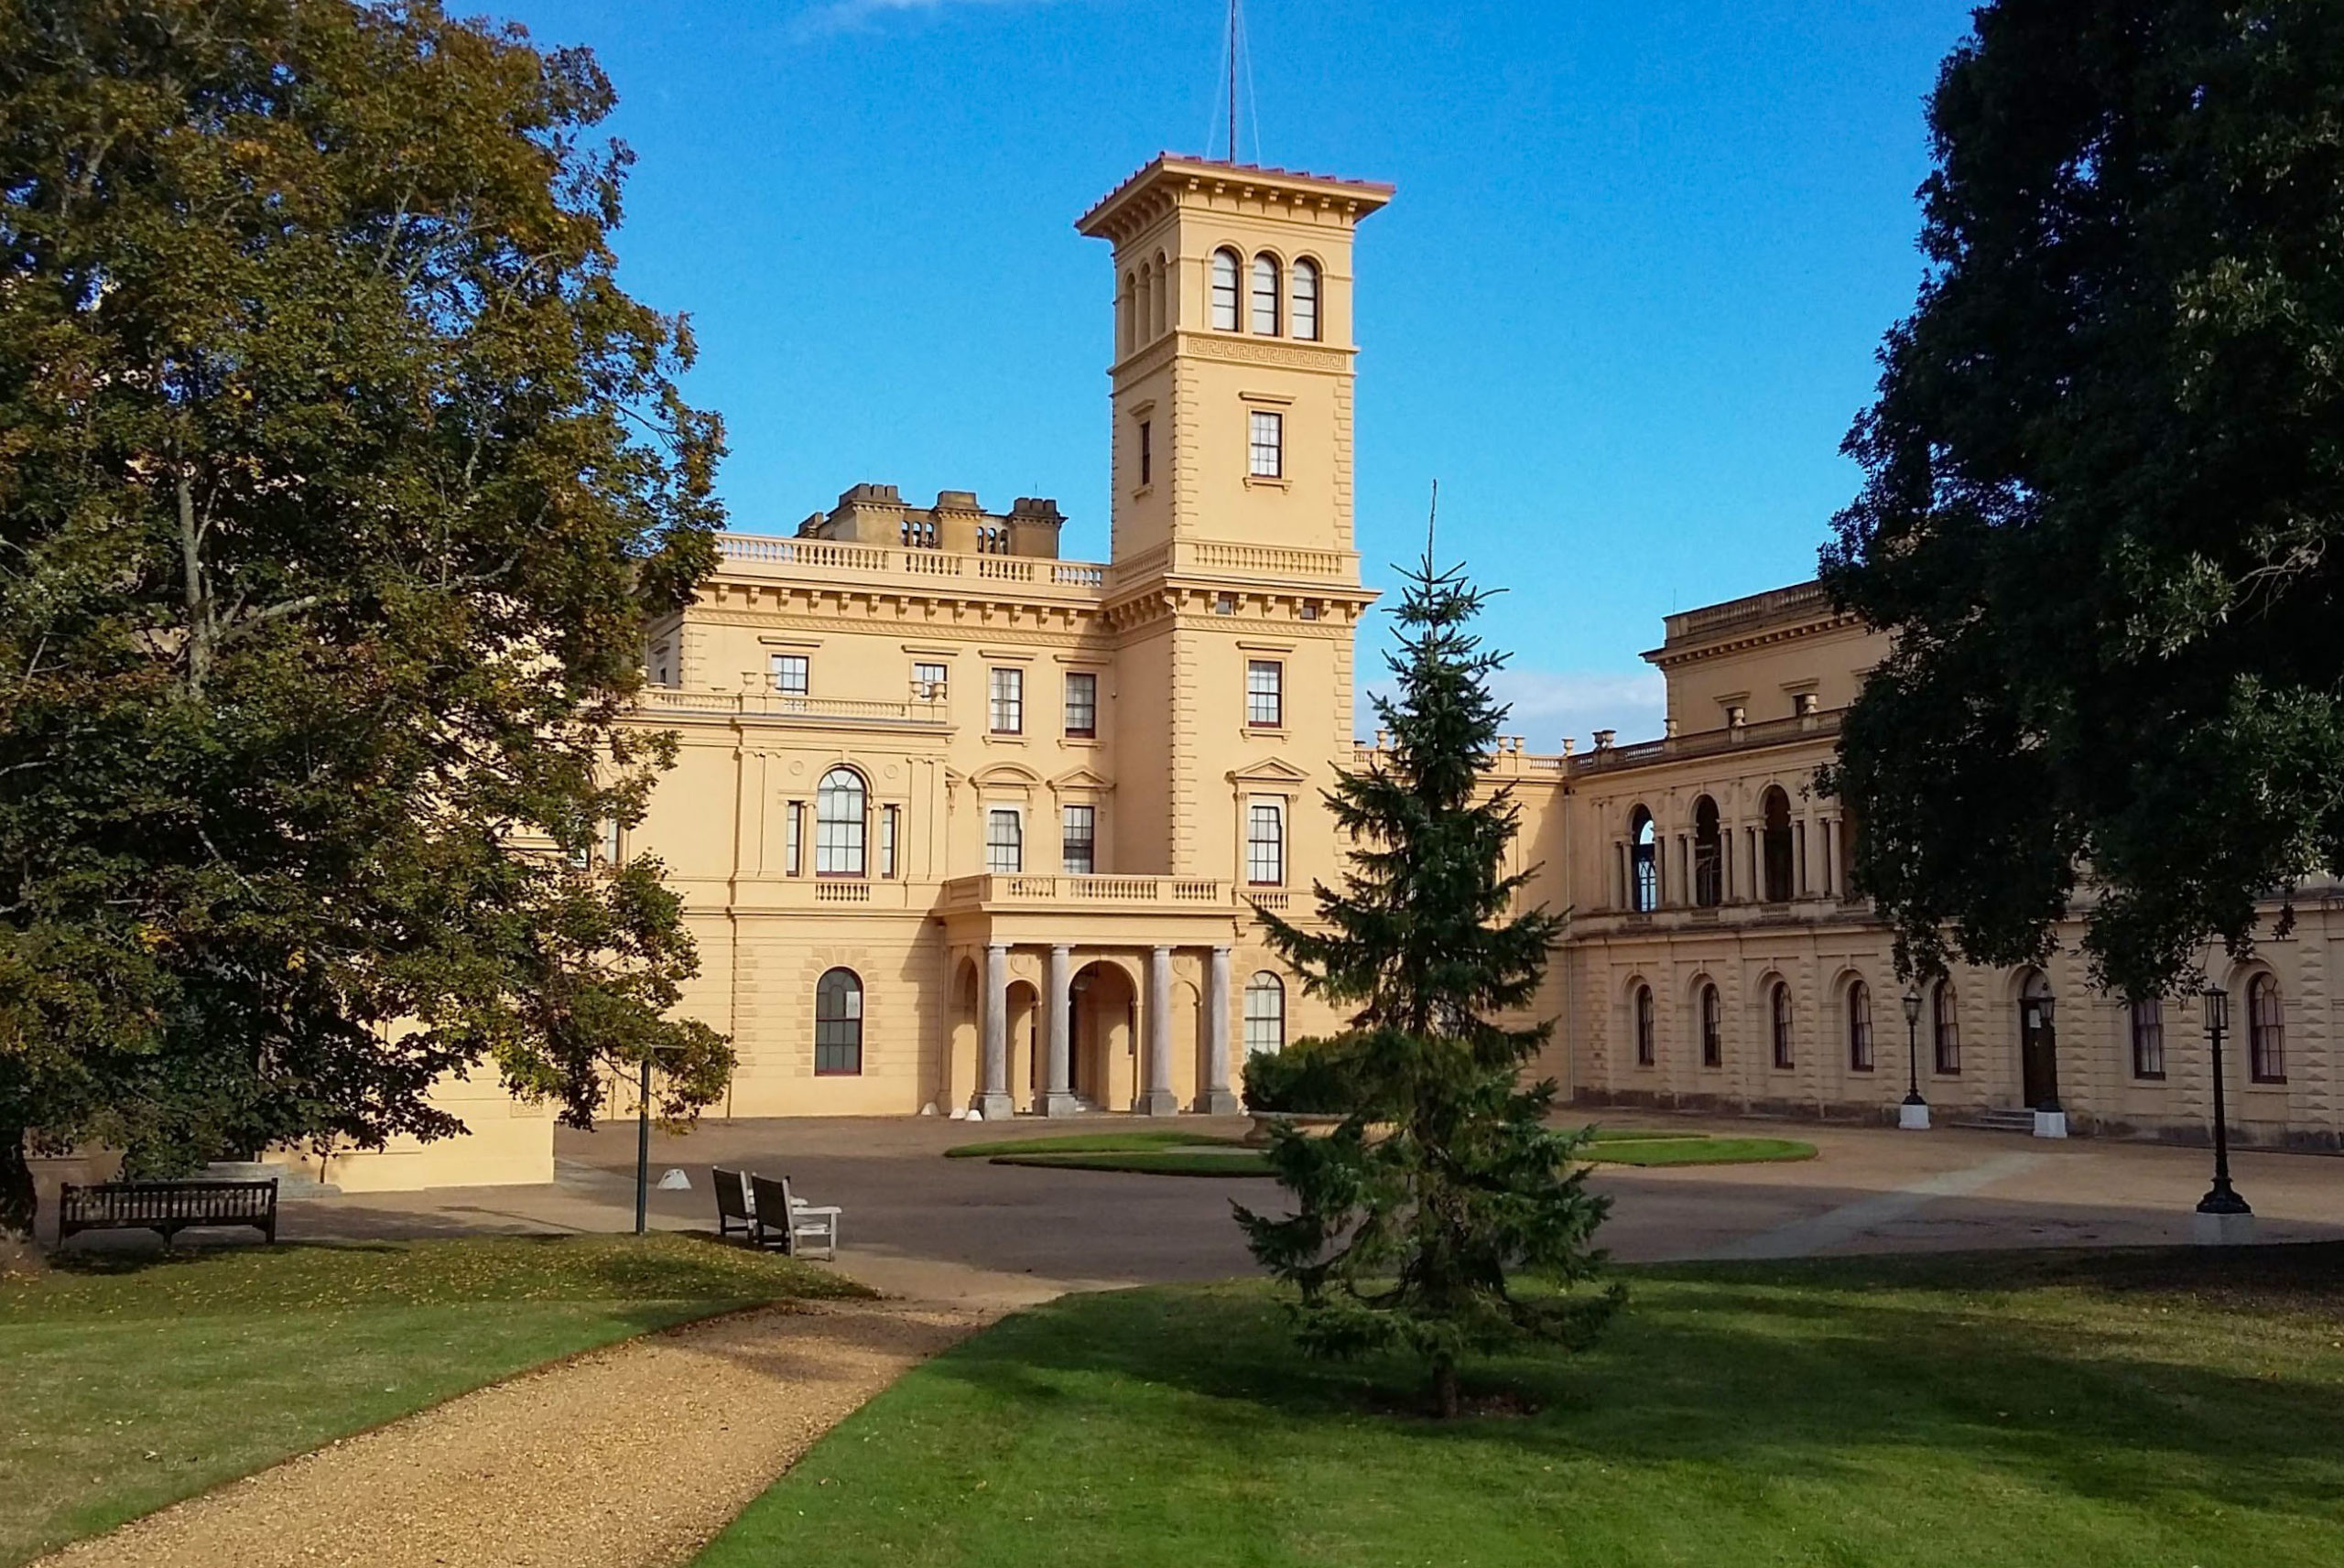 Osborne House © Peter Broster - licence [CC BY 3.0] from Wikimedia Commons